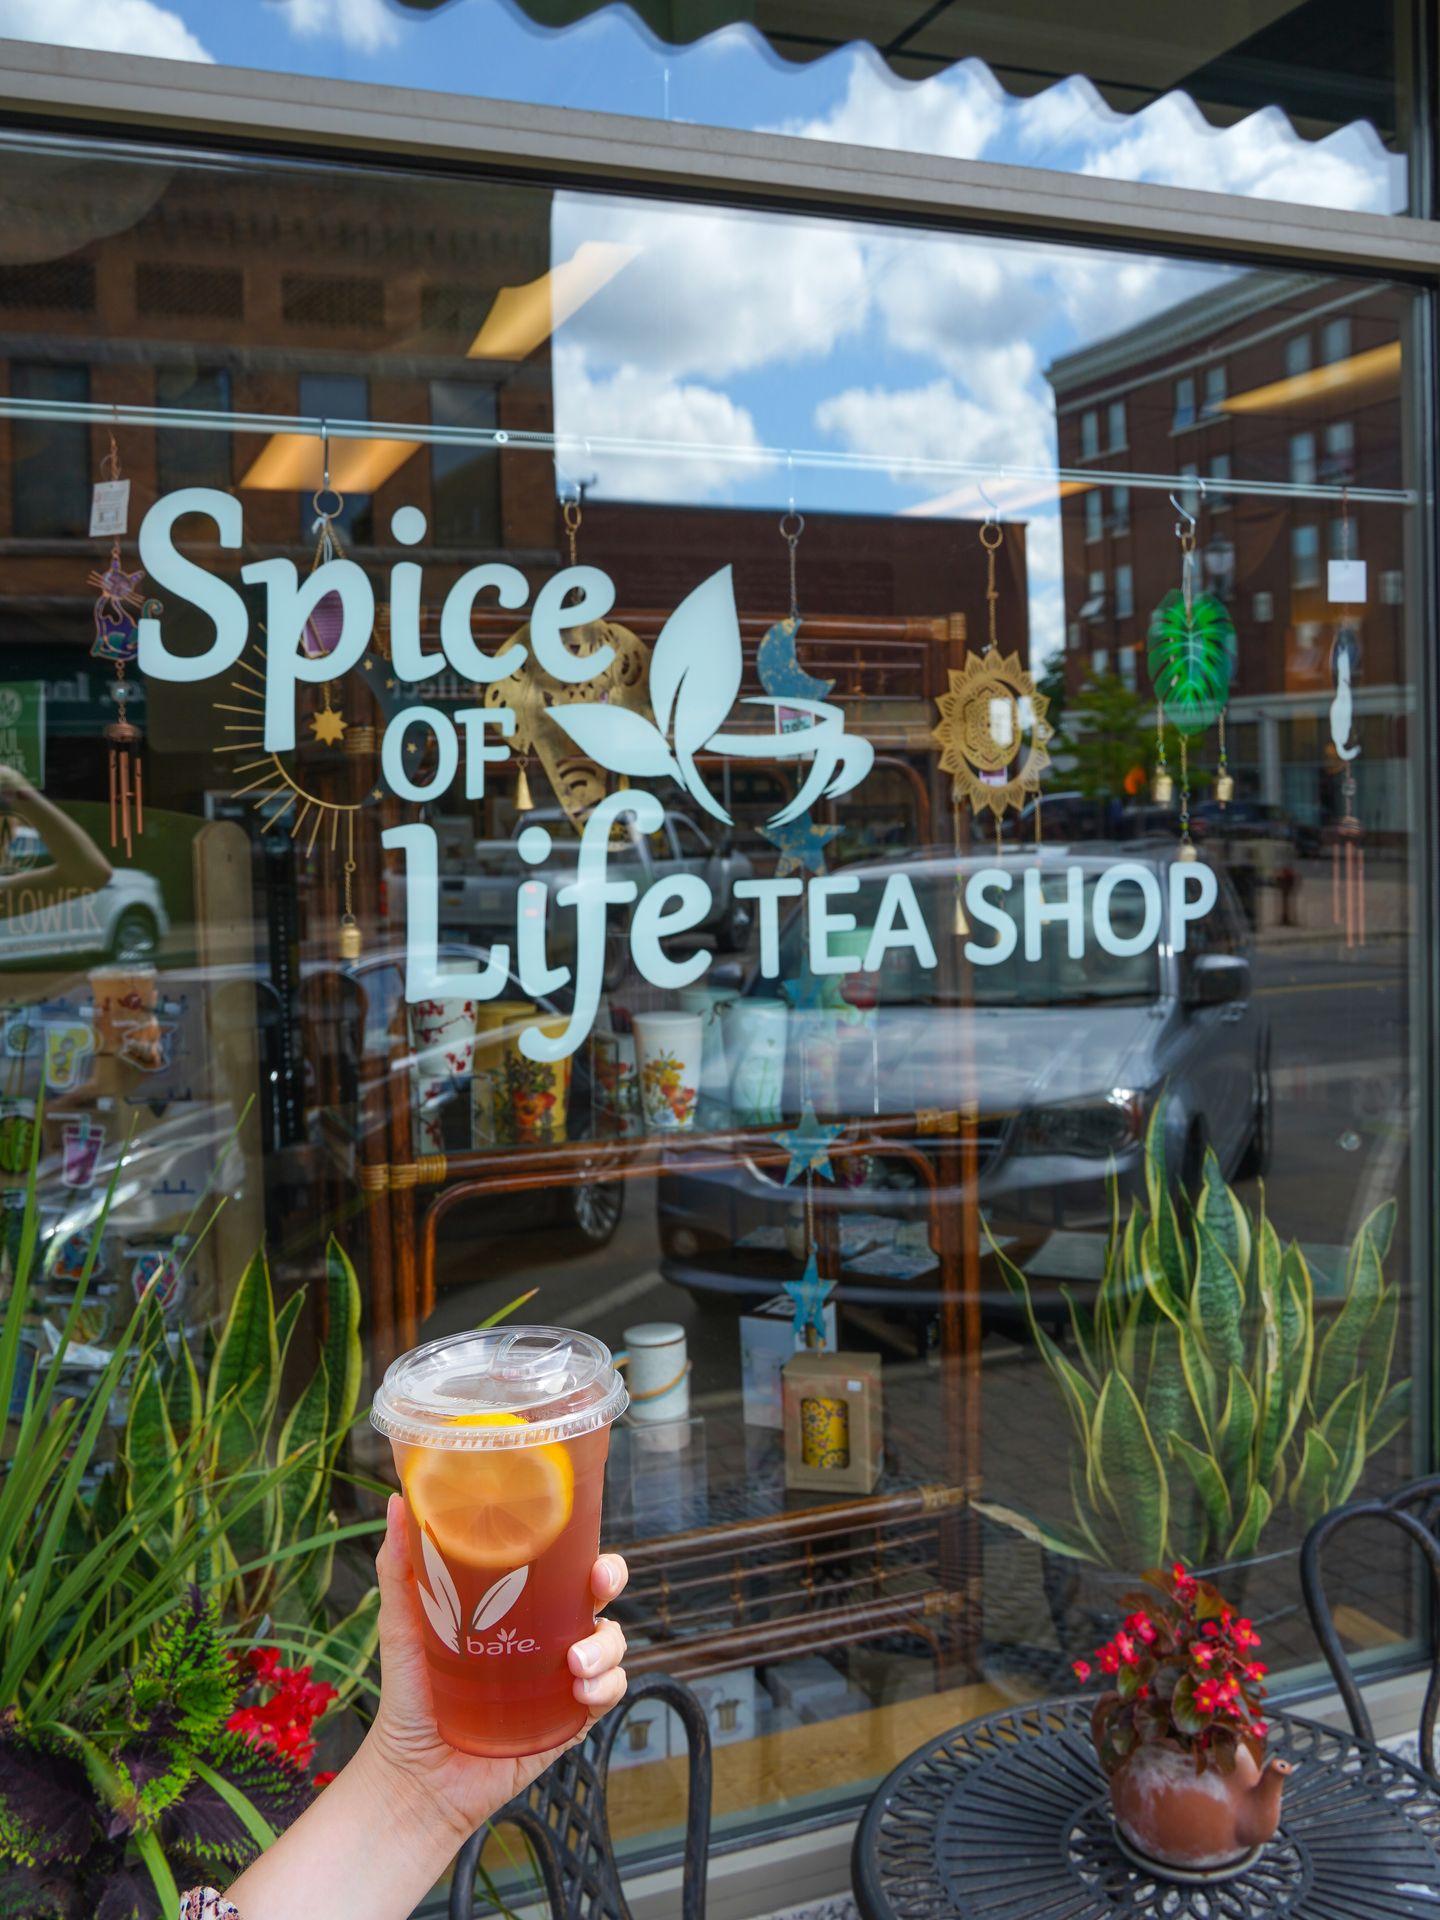 A hand holding a cup of tea in front of Spice of Life Tea Shop